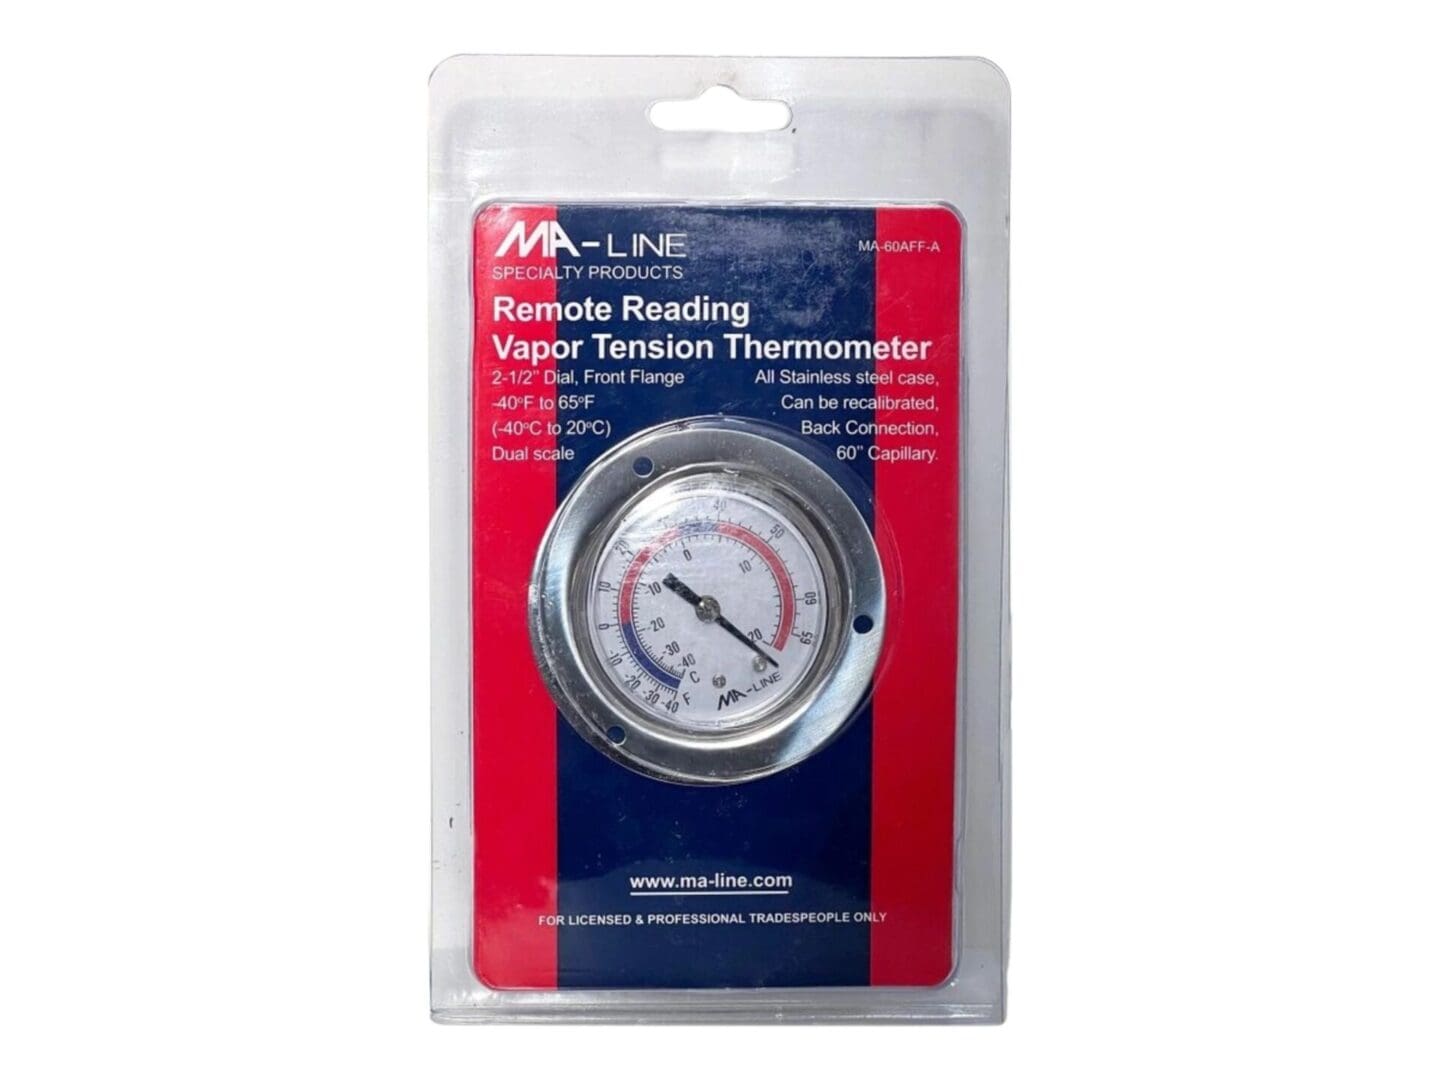 A thermometer is packaged in its package.